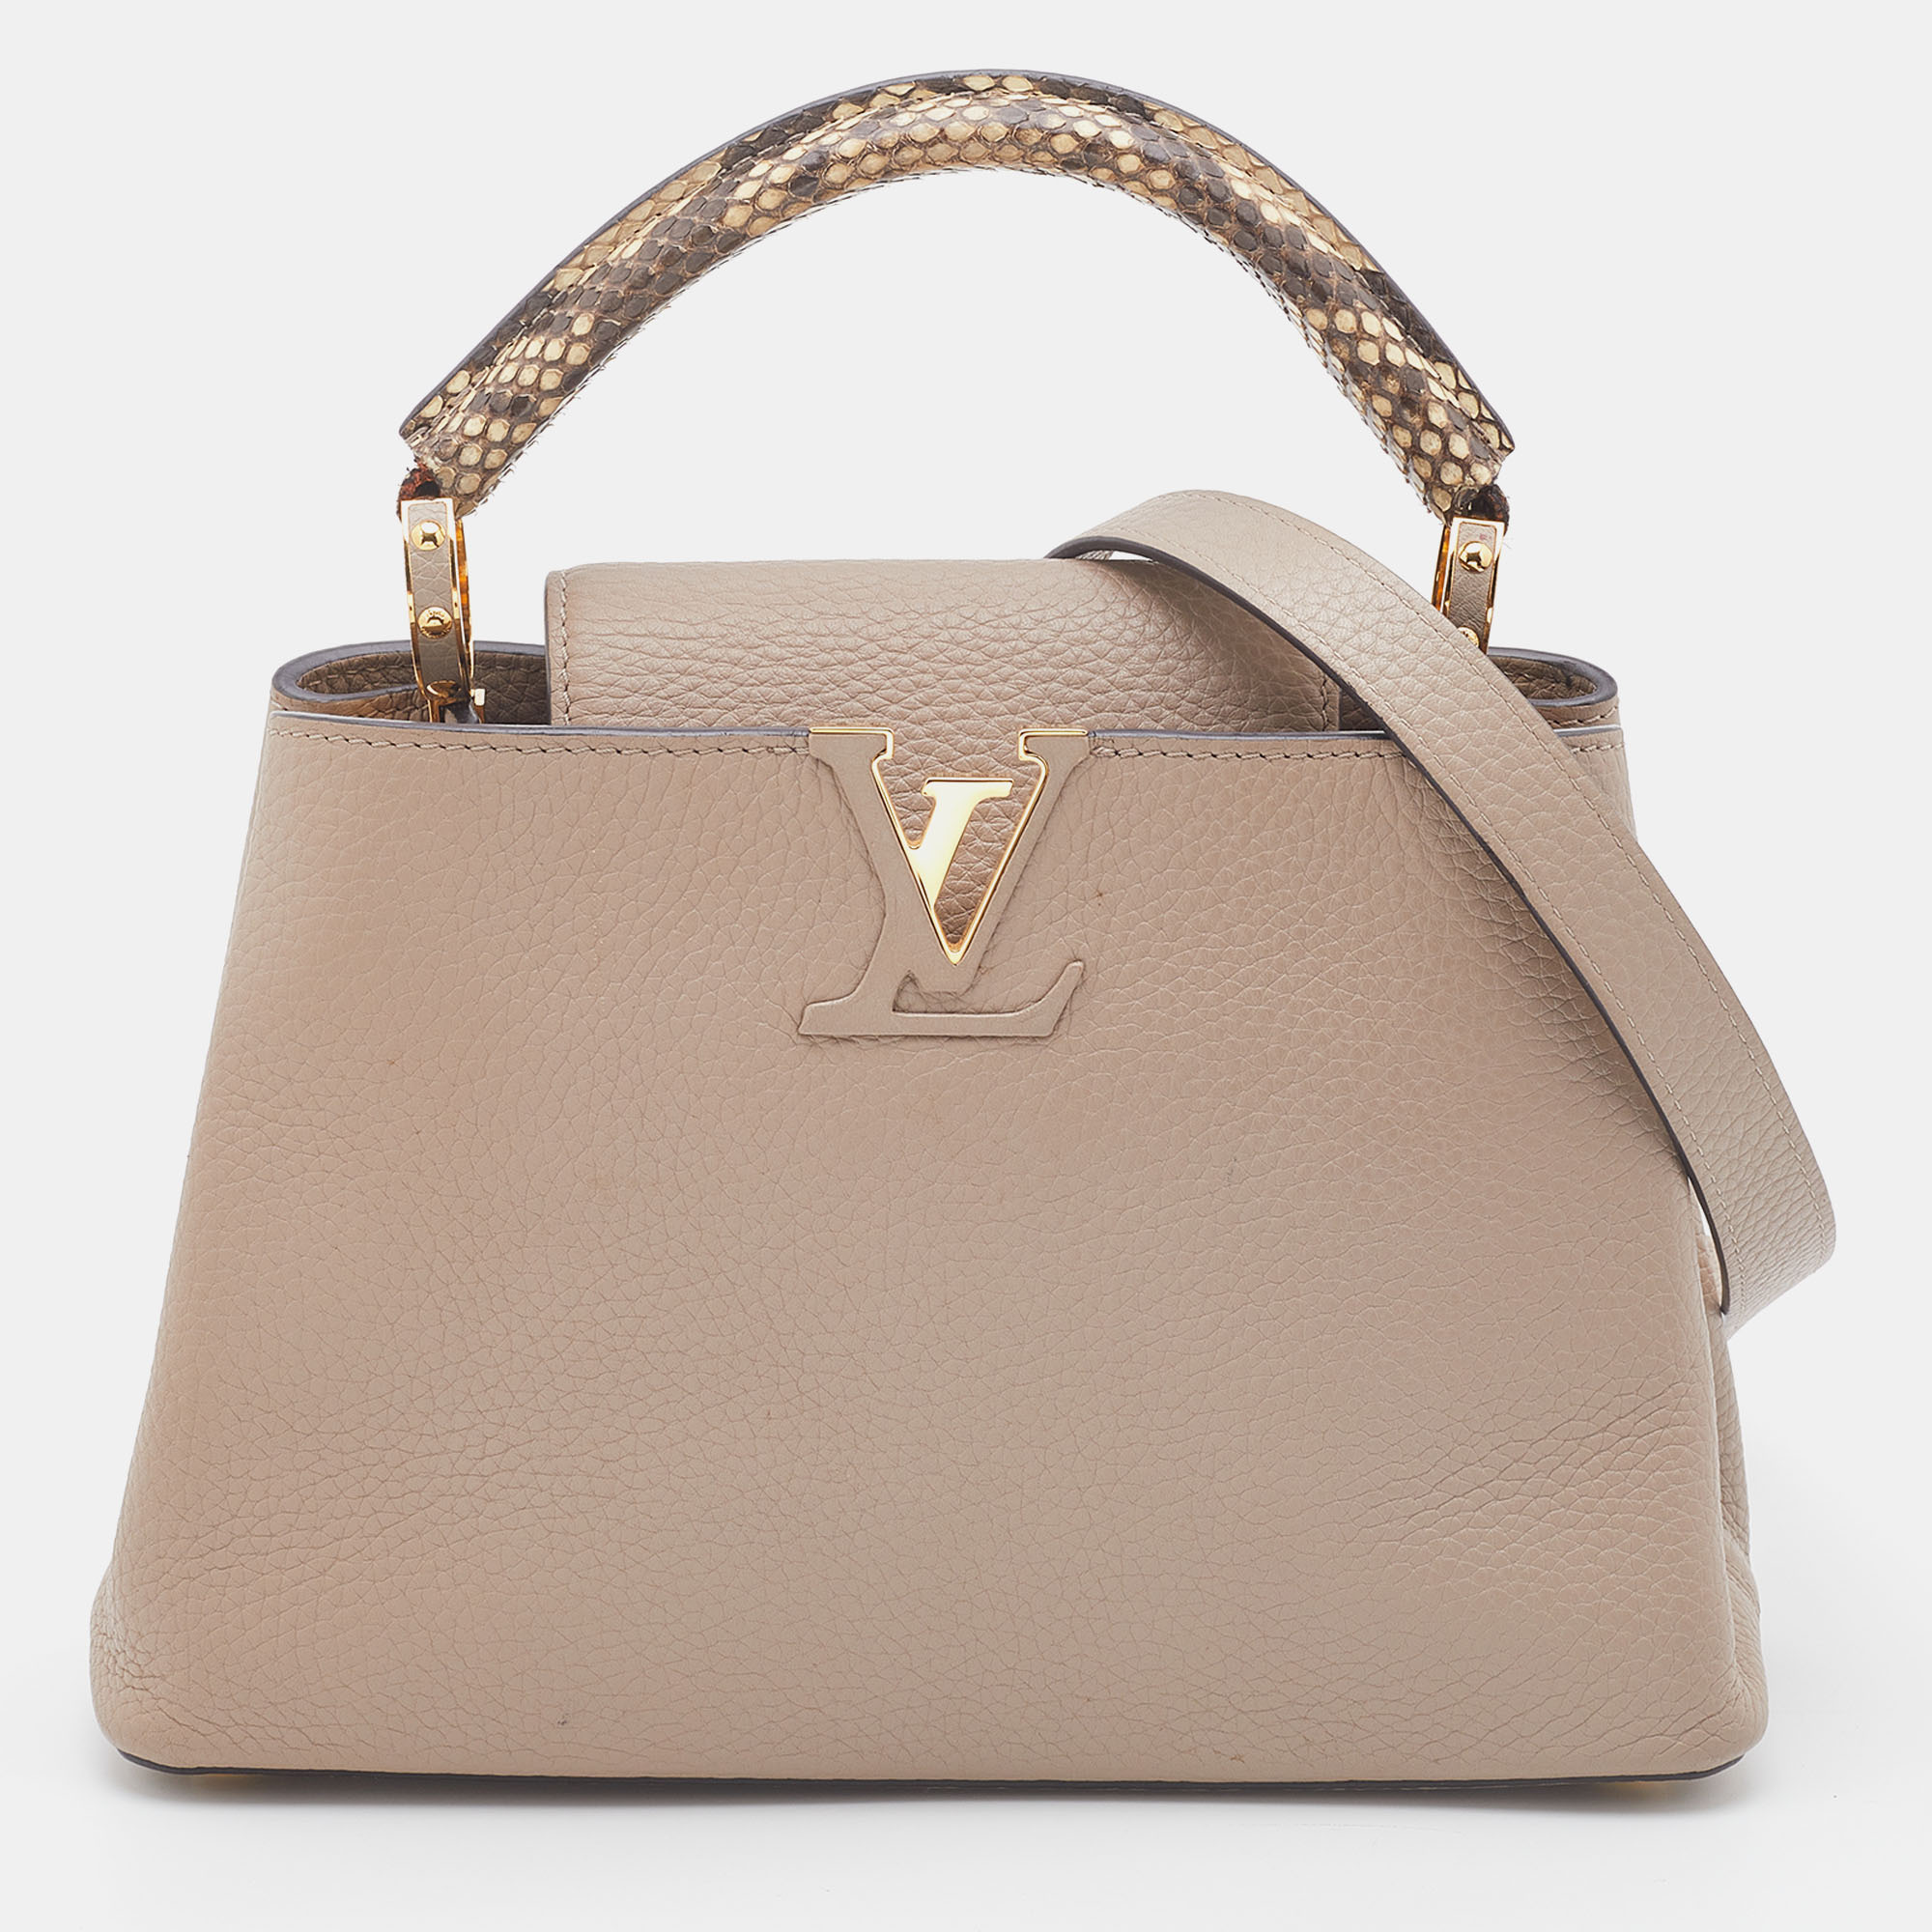 LOUIS VUITTON Taurillon Leather/Snakeskin Leather Capucines BB